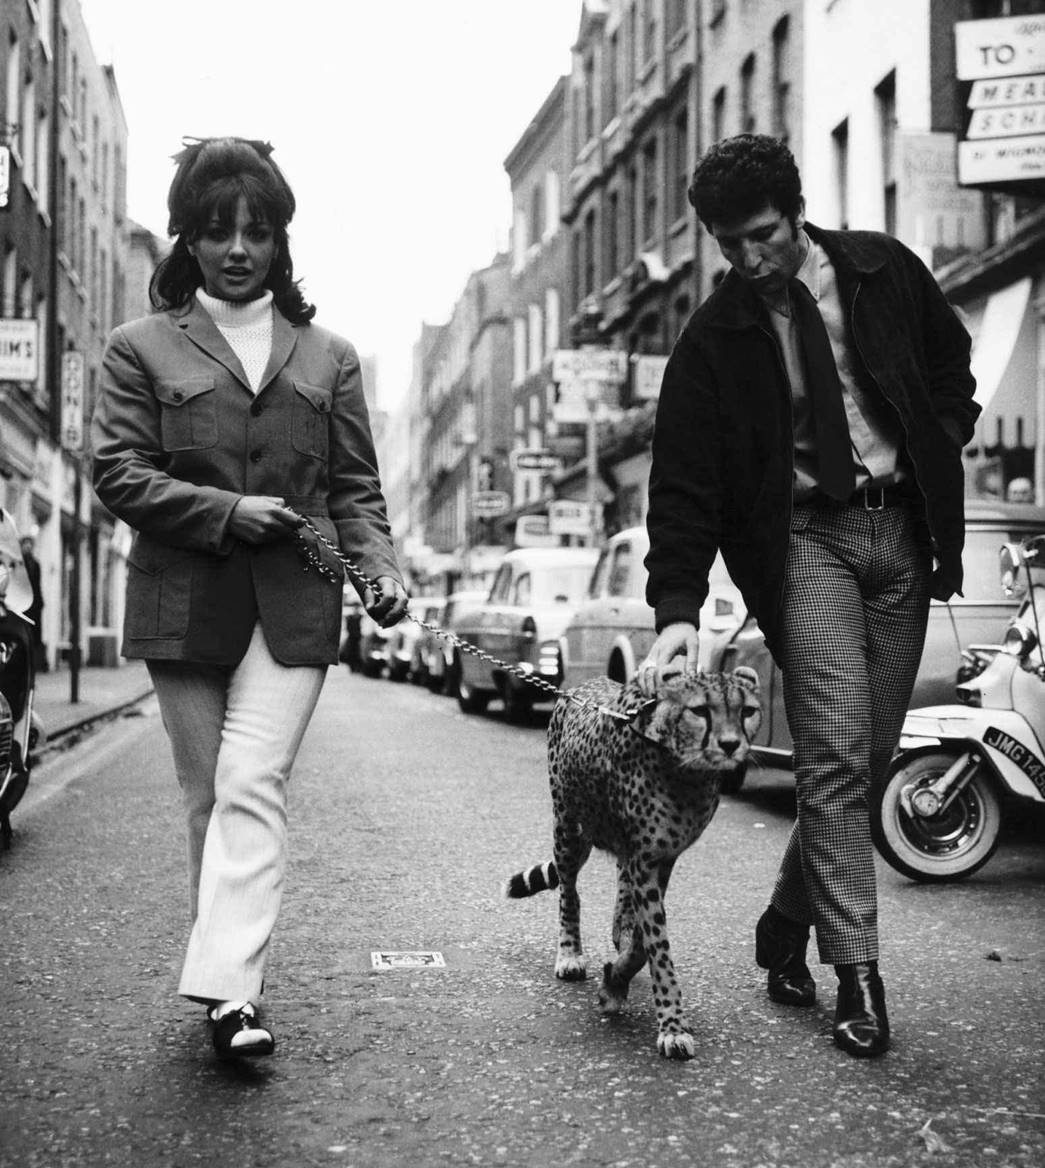 Singer Tom Jones and actress-model Christina Spooner accompanied by a cheetah during a promotion for Irvine Sellar on Carnaby Street, 1966. (Courtesy: Trinity Mirror / Mirrorpix / Alamy Stock Photo) 